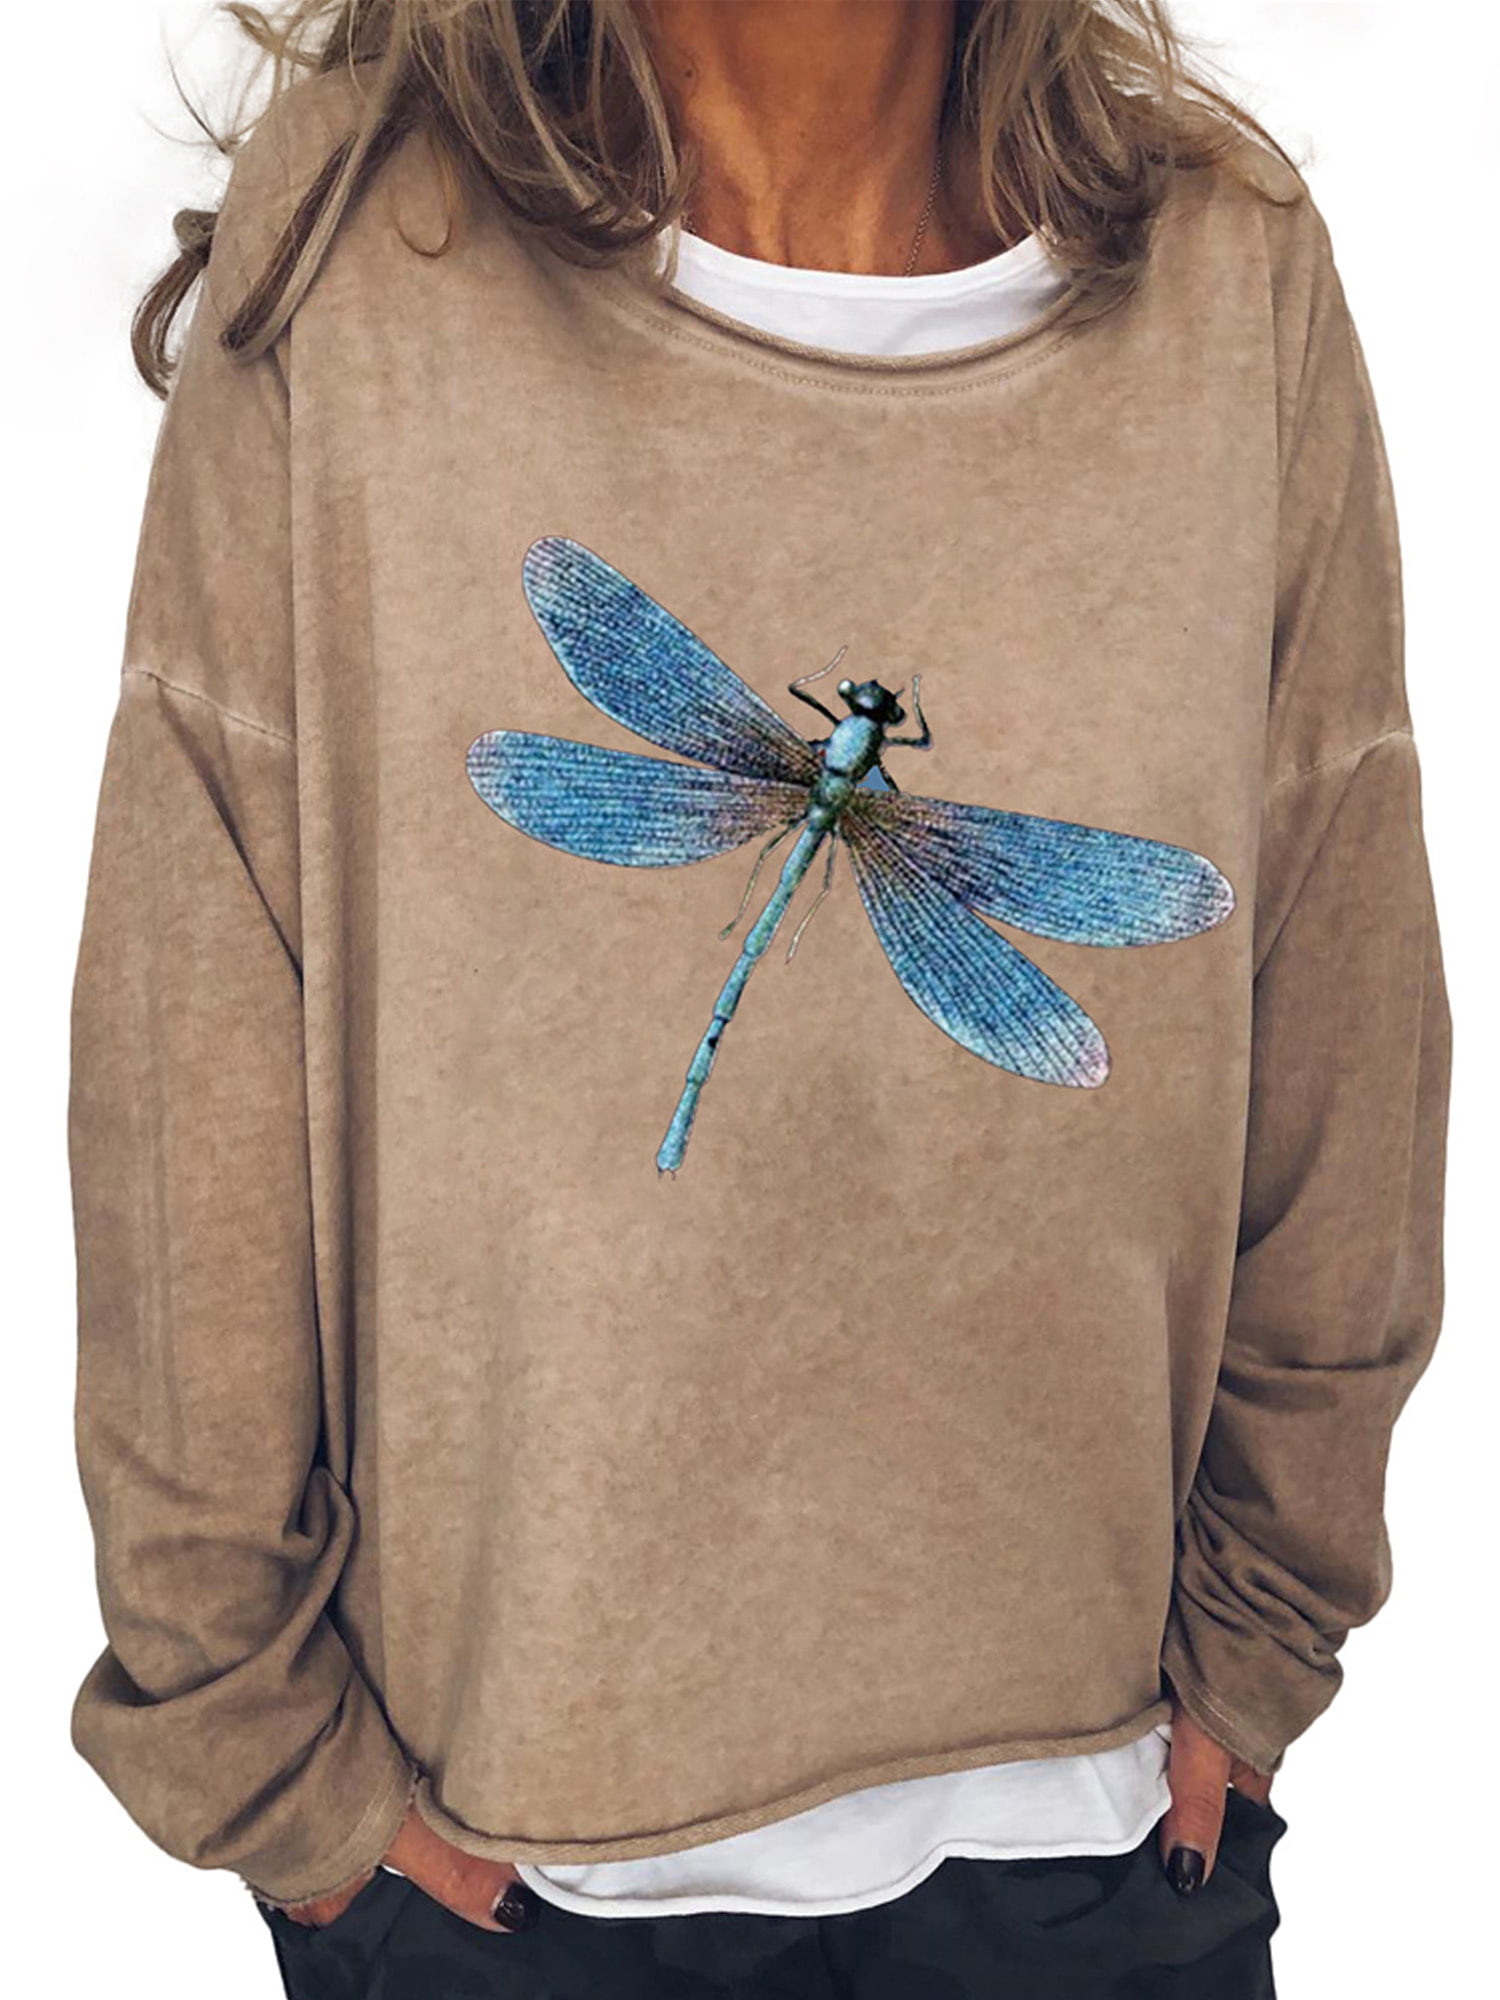 Womens Dragonfly Gradient Print Contrast Color Crewneck Long Sleeve Pullover Tops T Shirts Blouse Sweatshirts for Women 